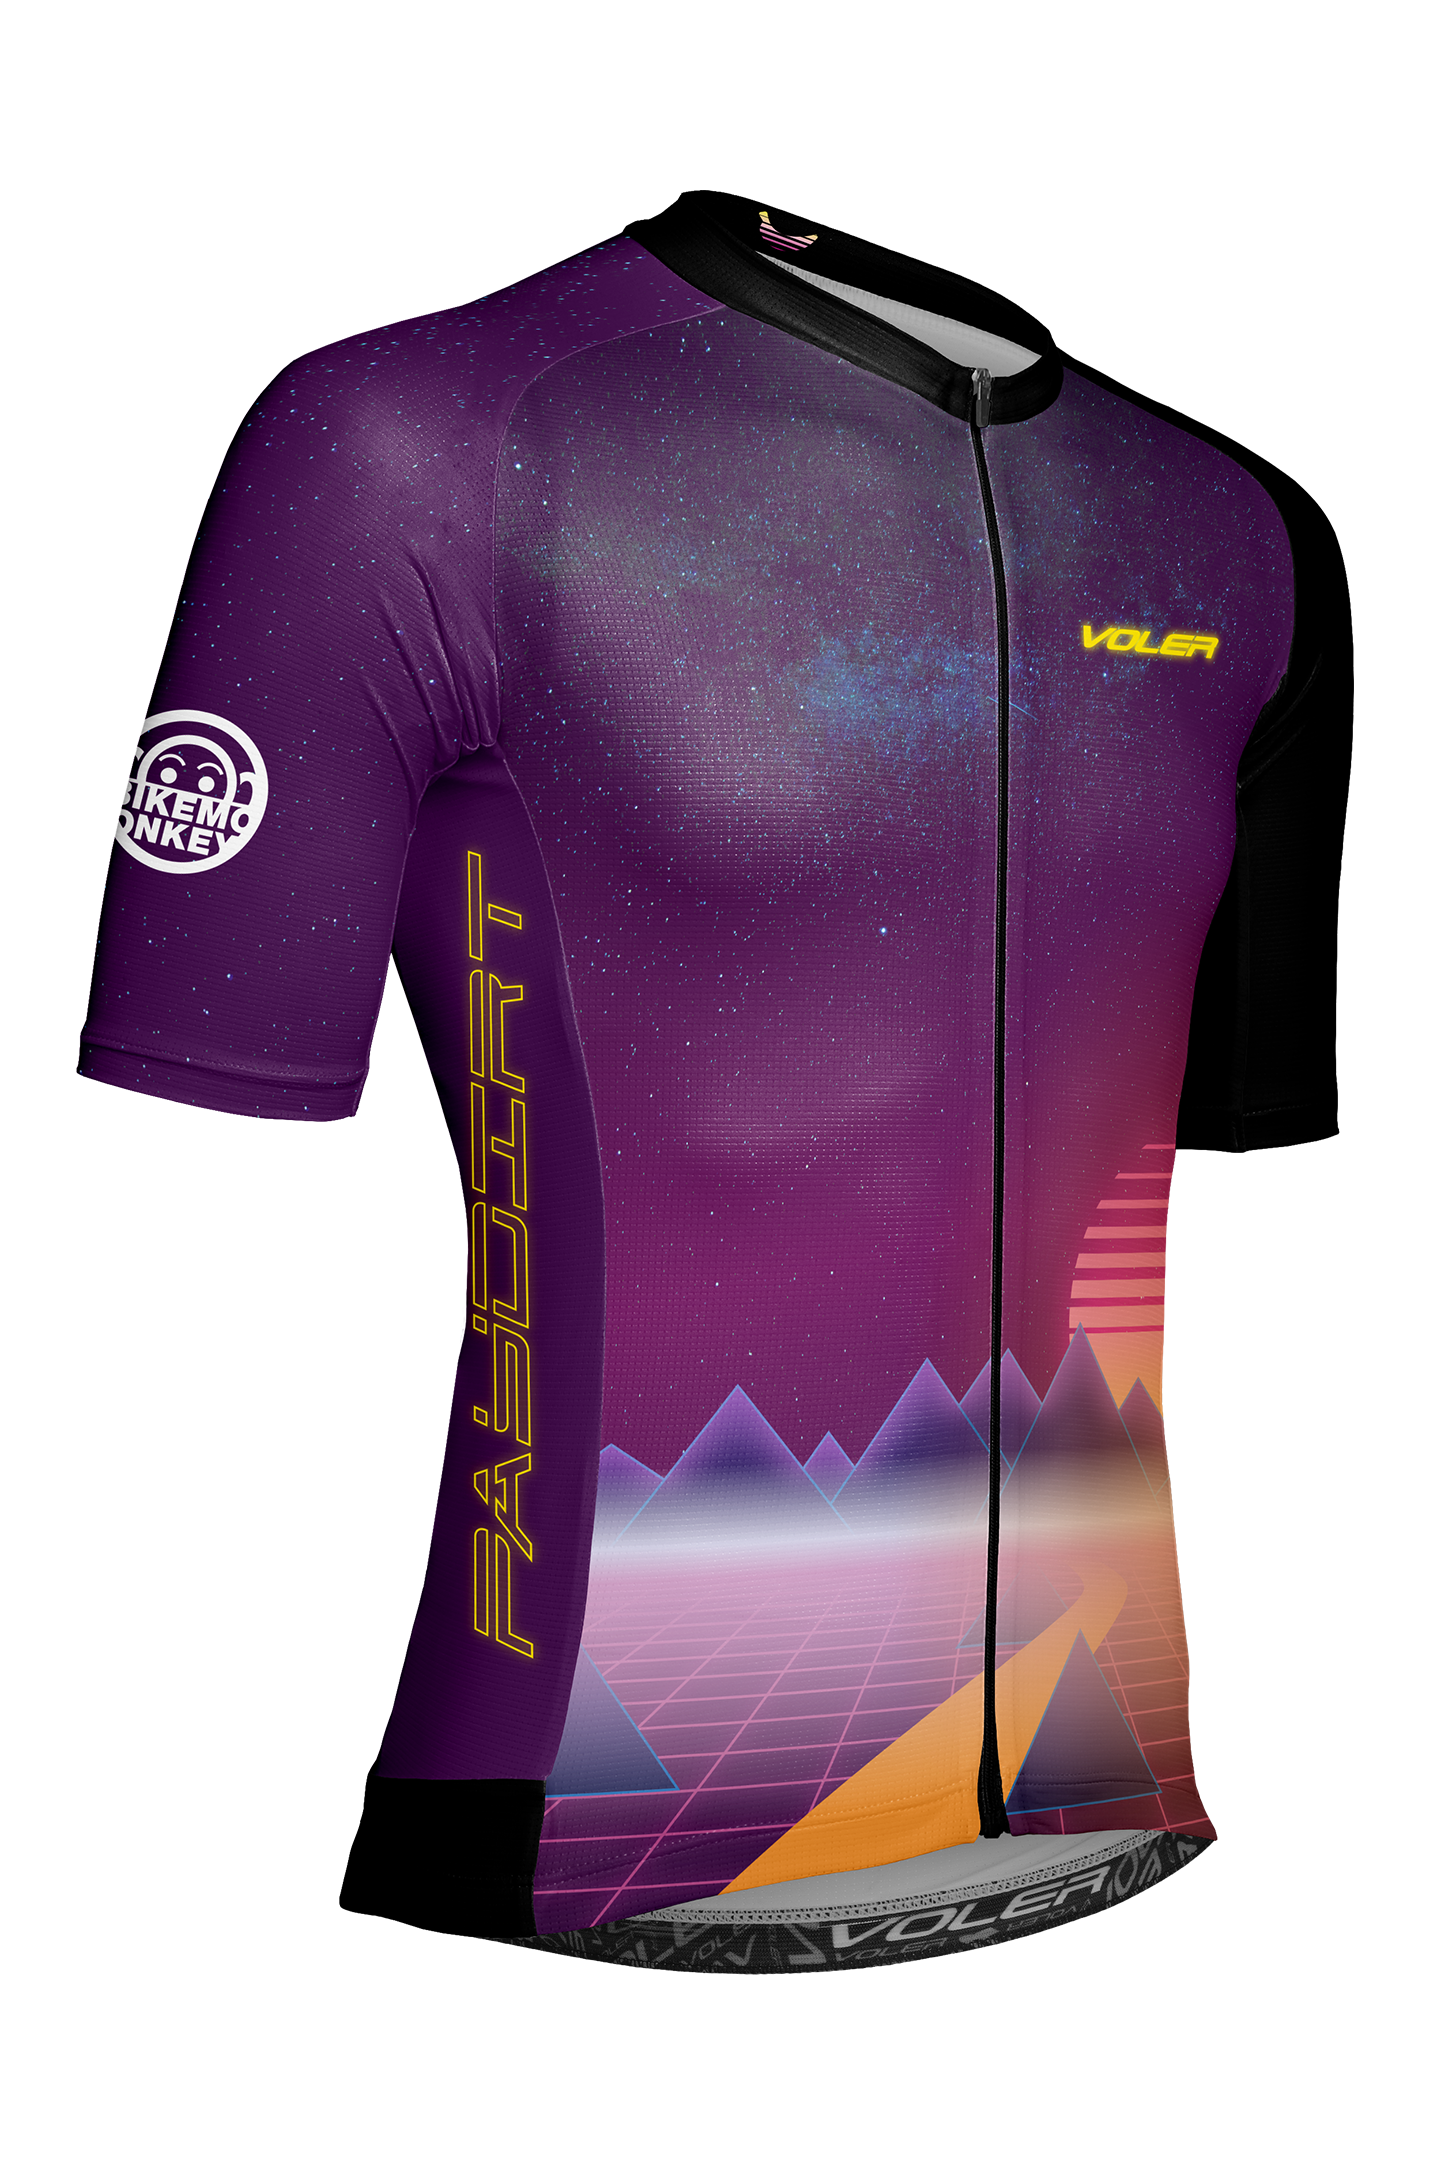 Paydirt's Velocity Air Men's Jersey by Voler